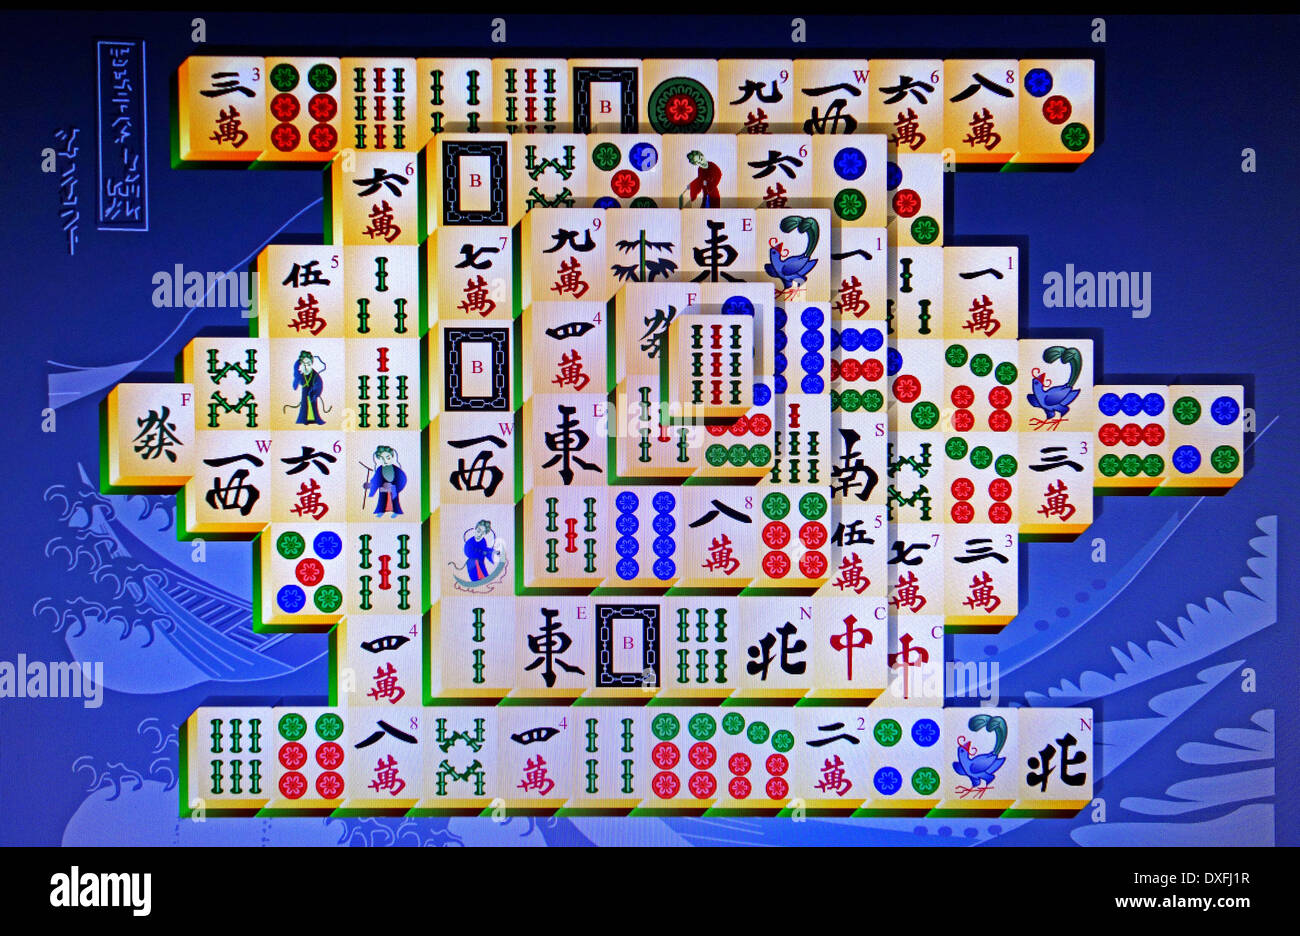 Mahjong Titans - Play The Free Mobile Game Online